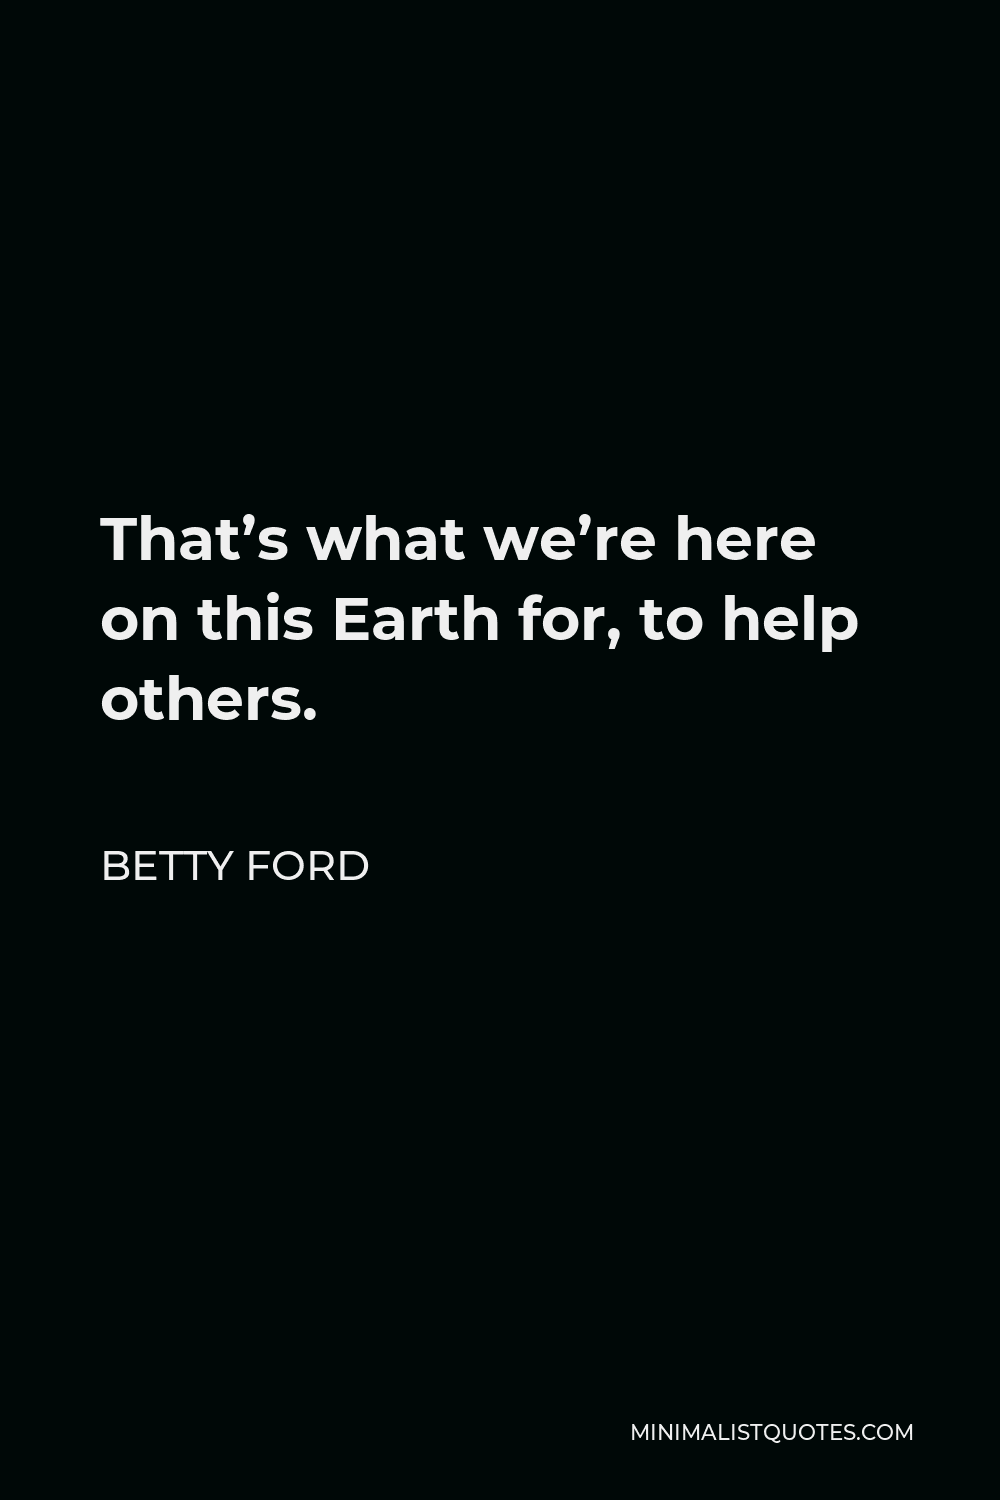 Betty Ford Quote - That’s what we’re here on this Earth for, to help others.